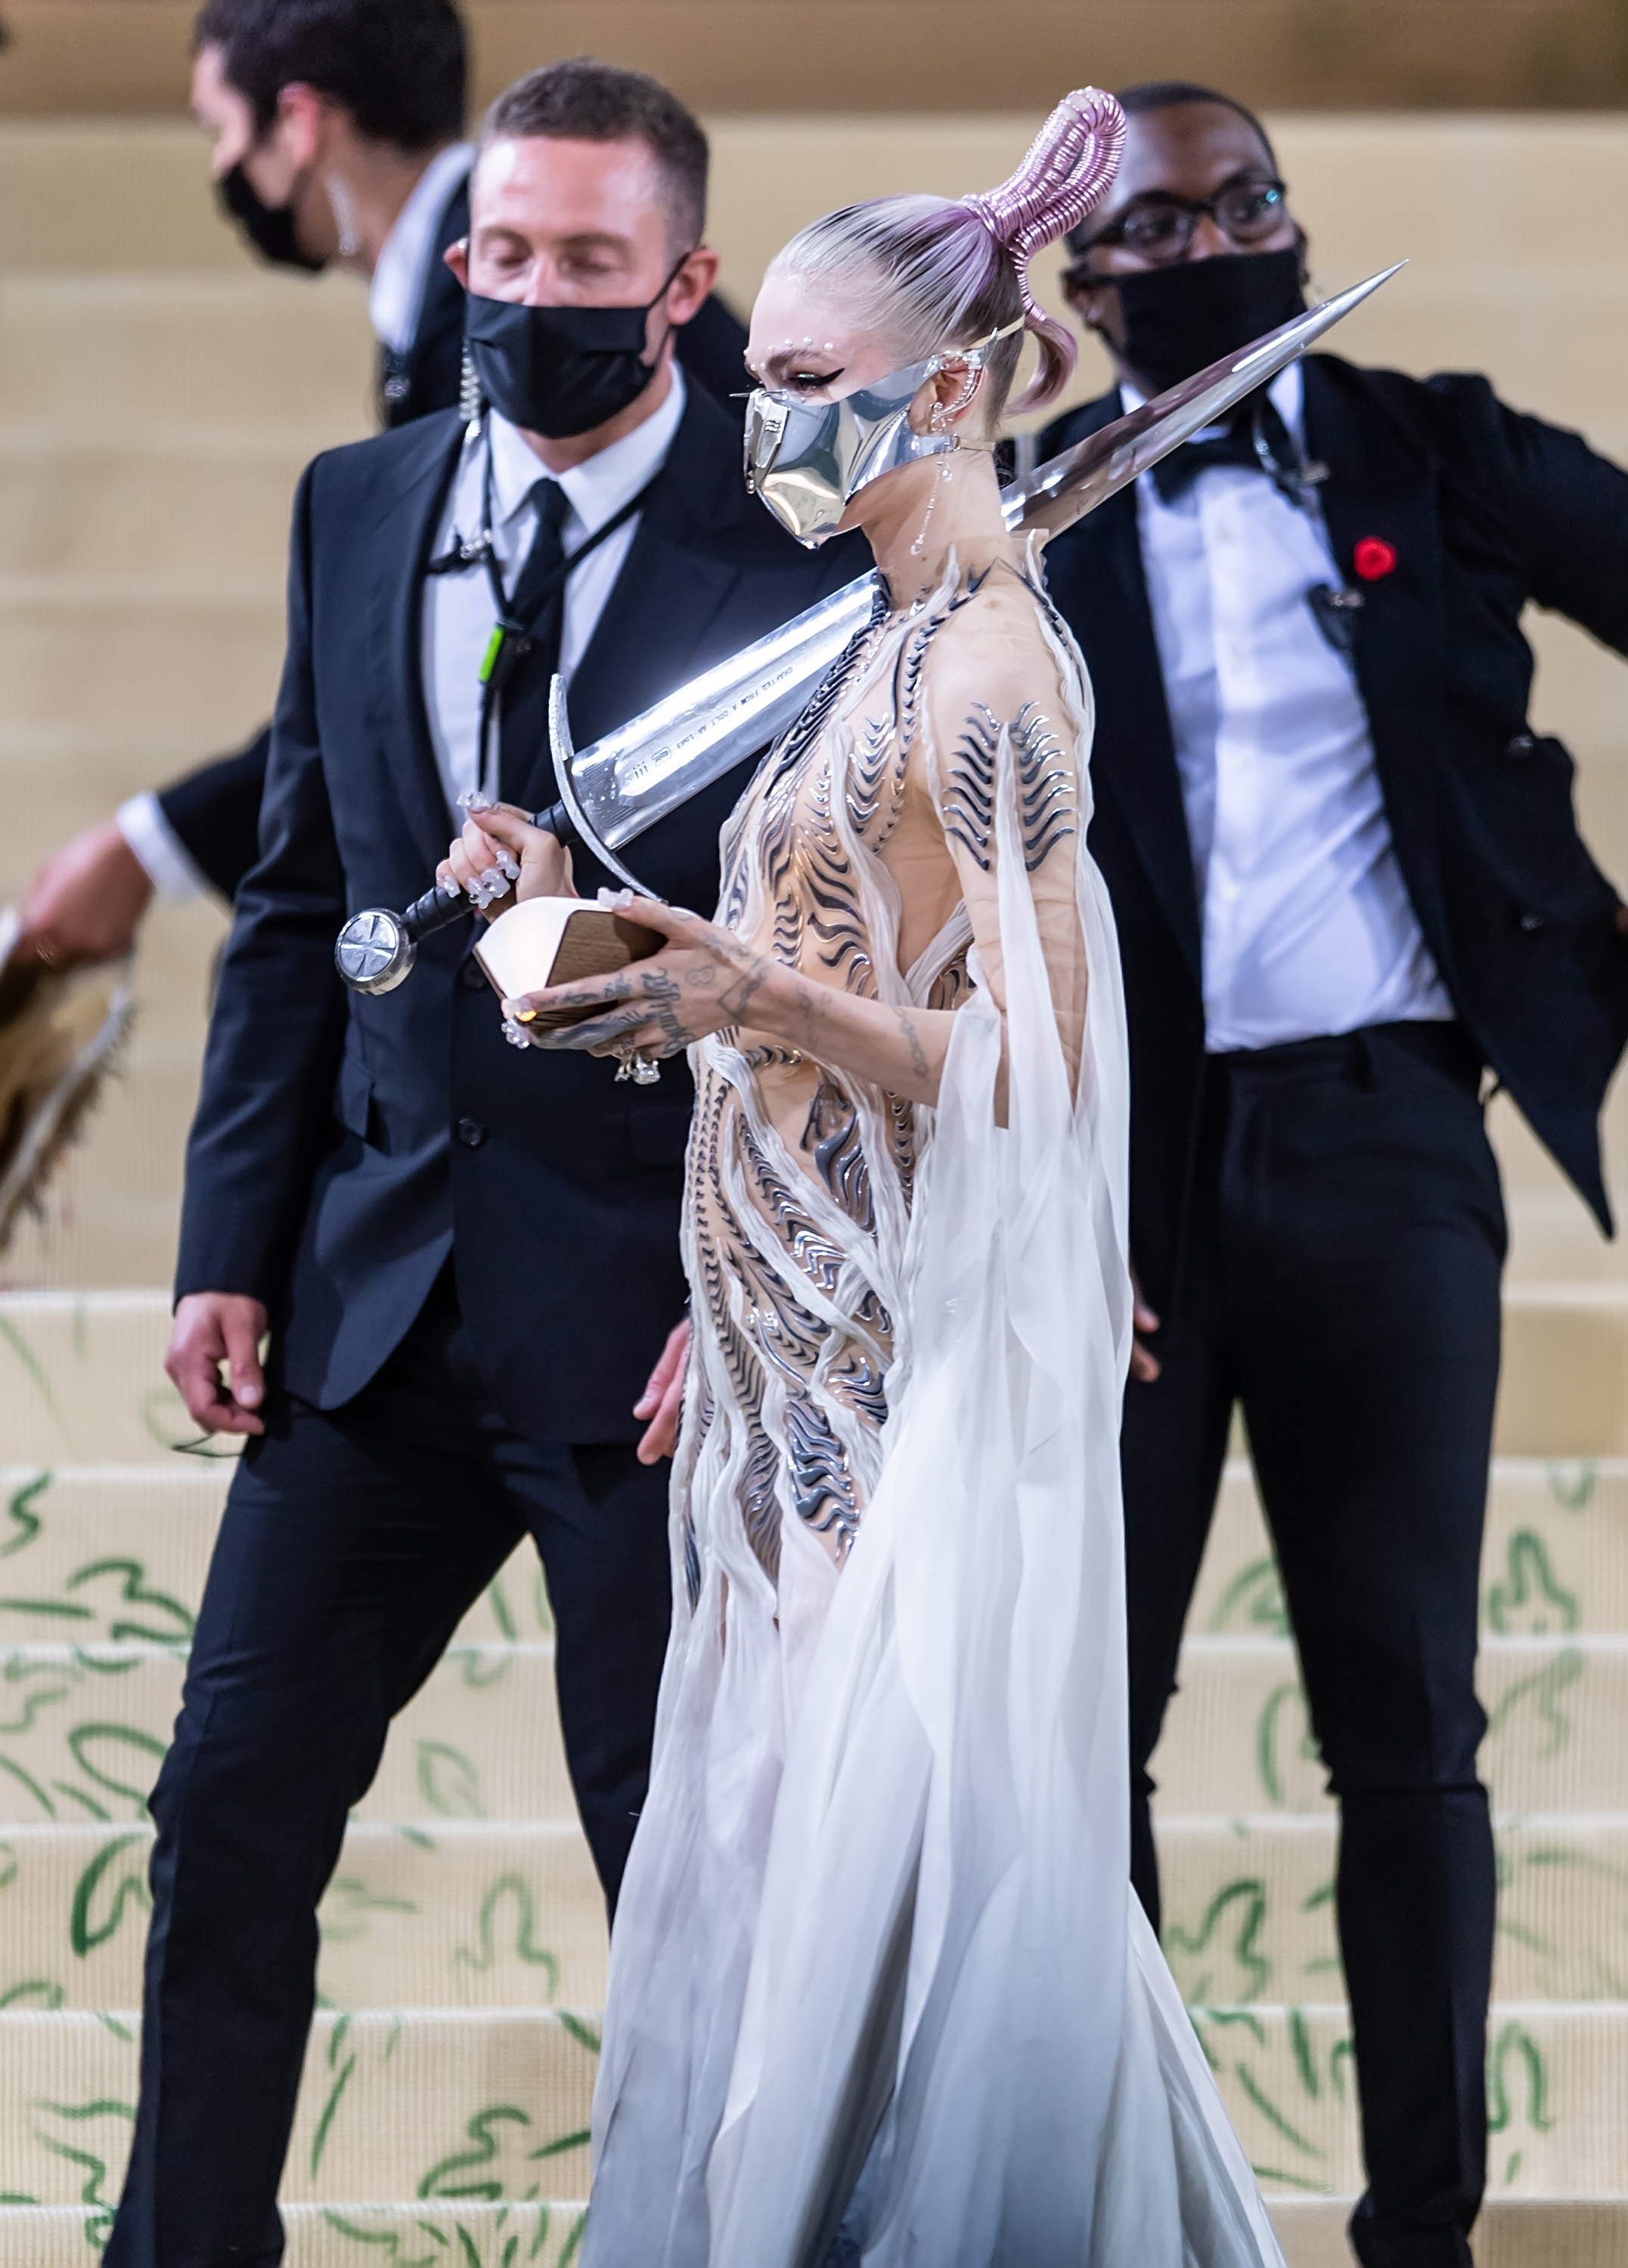 Grimes in a futuristic, sculptural gown with metallic accents, at a formal event, with masked attendees in the background